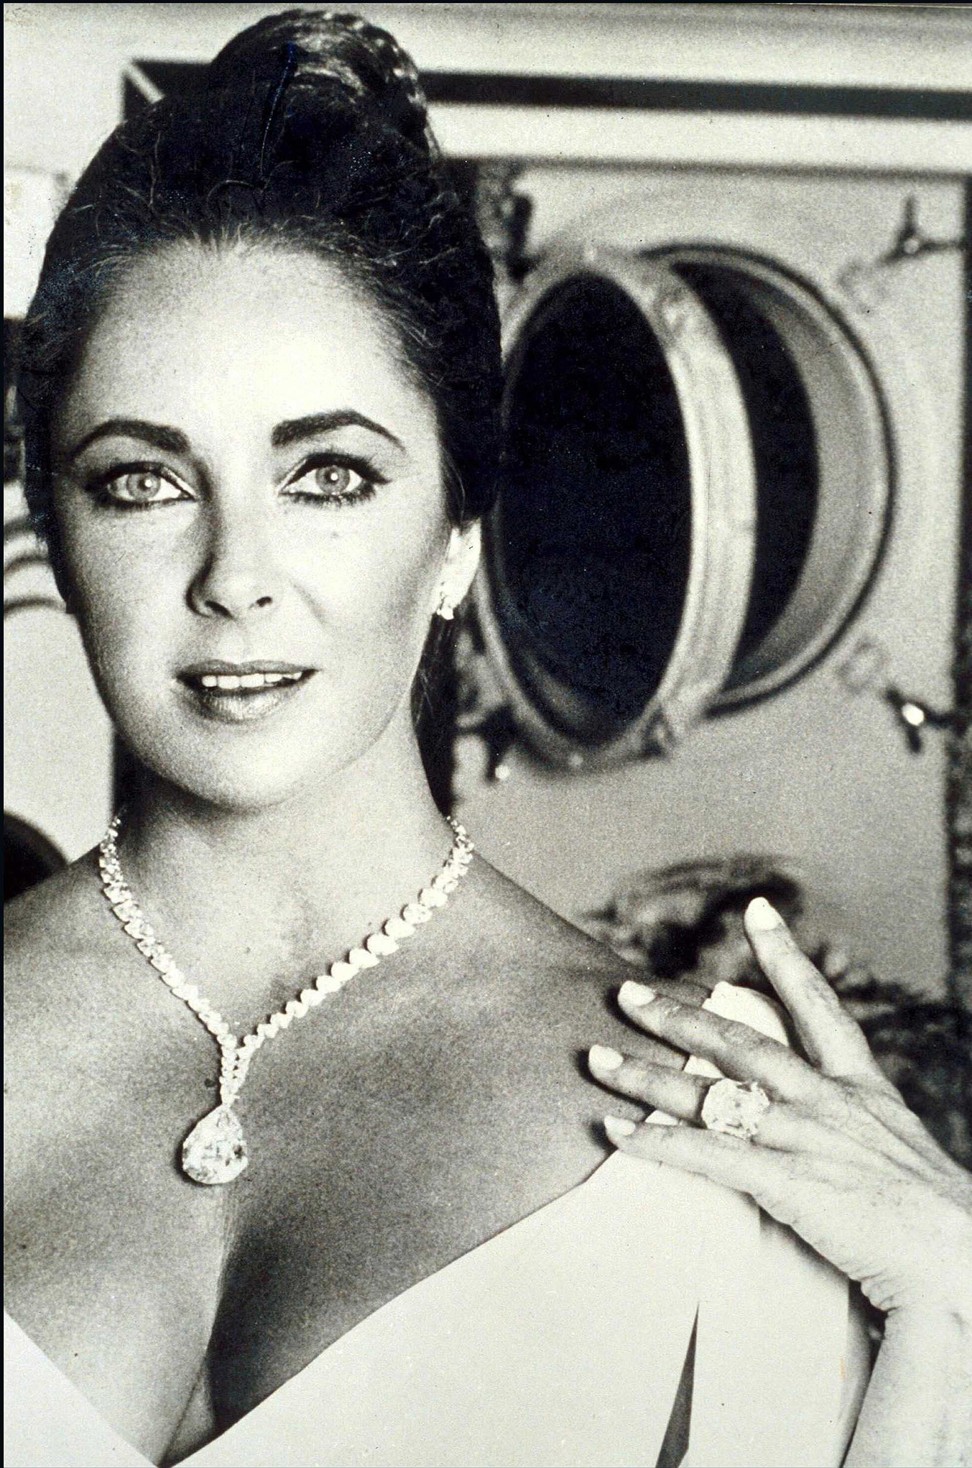 Elizabeth Taylor wears the Cartier Taylor-Burton diamond given by her husband, the actor Richard Burton. Photo: Cartier Archives